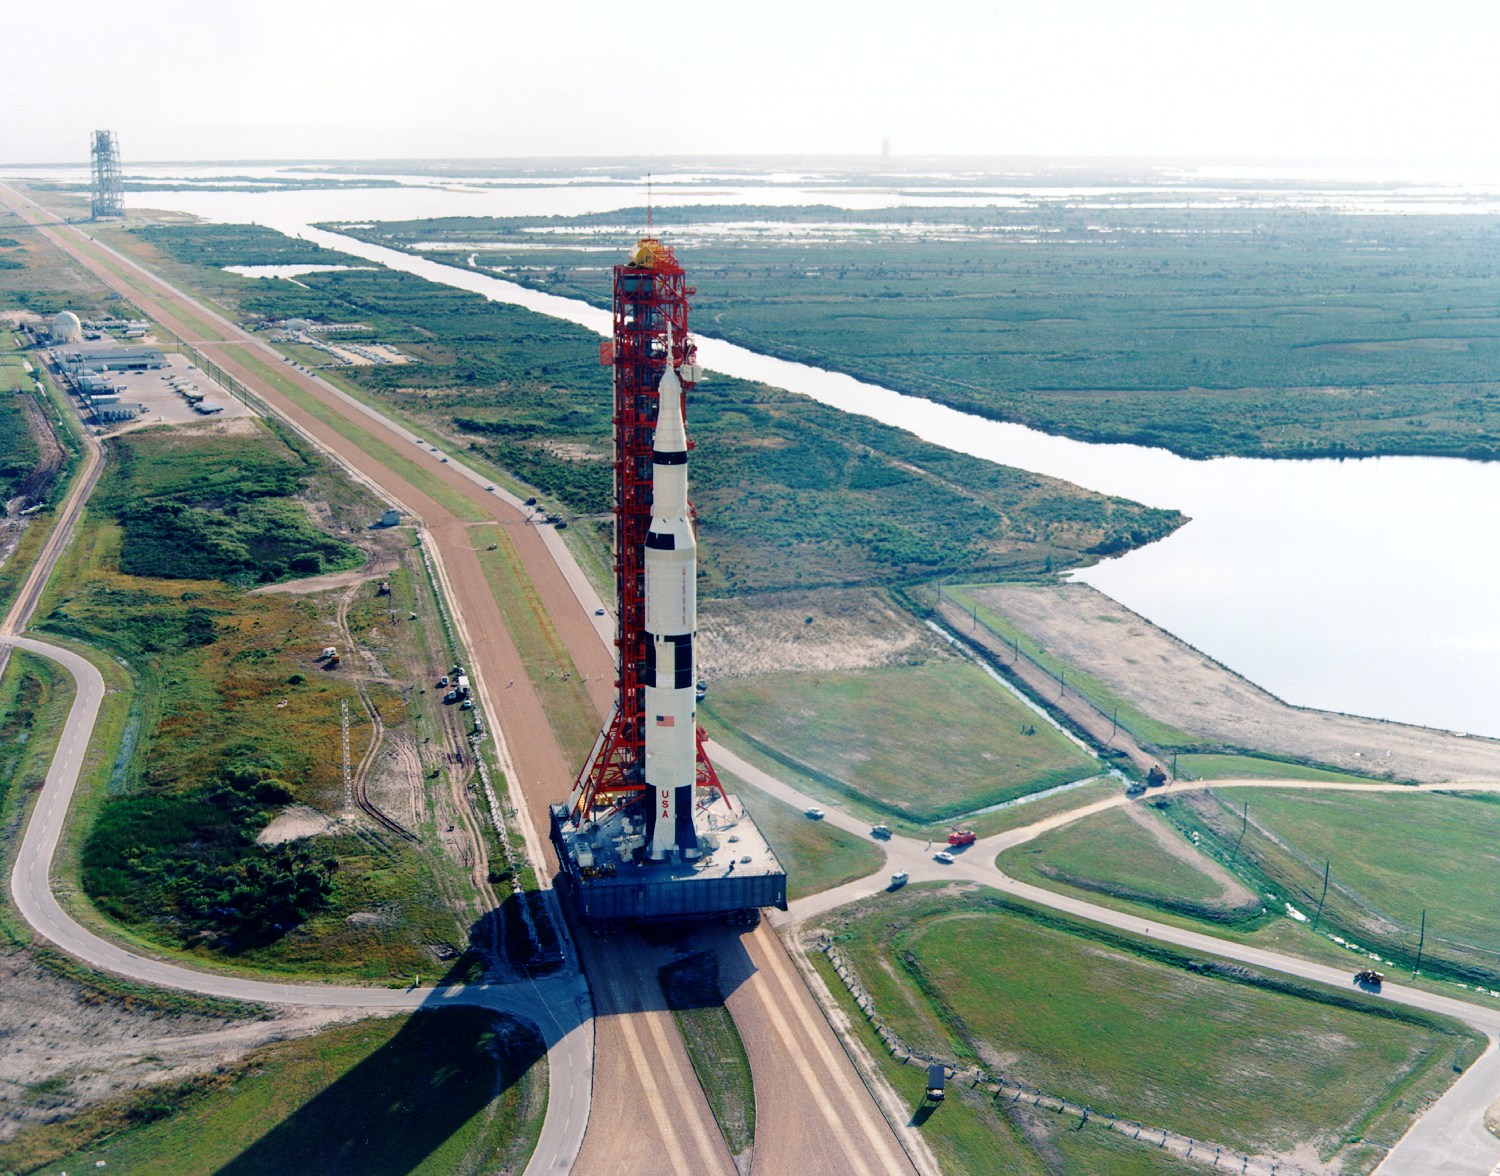 Rollout to the launch pad of the Apollo 8 Saturn V on October 9, 1968.